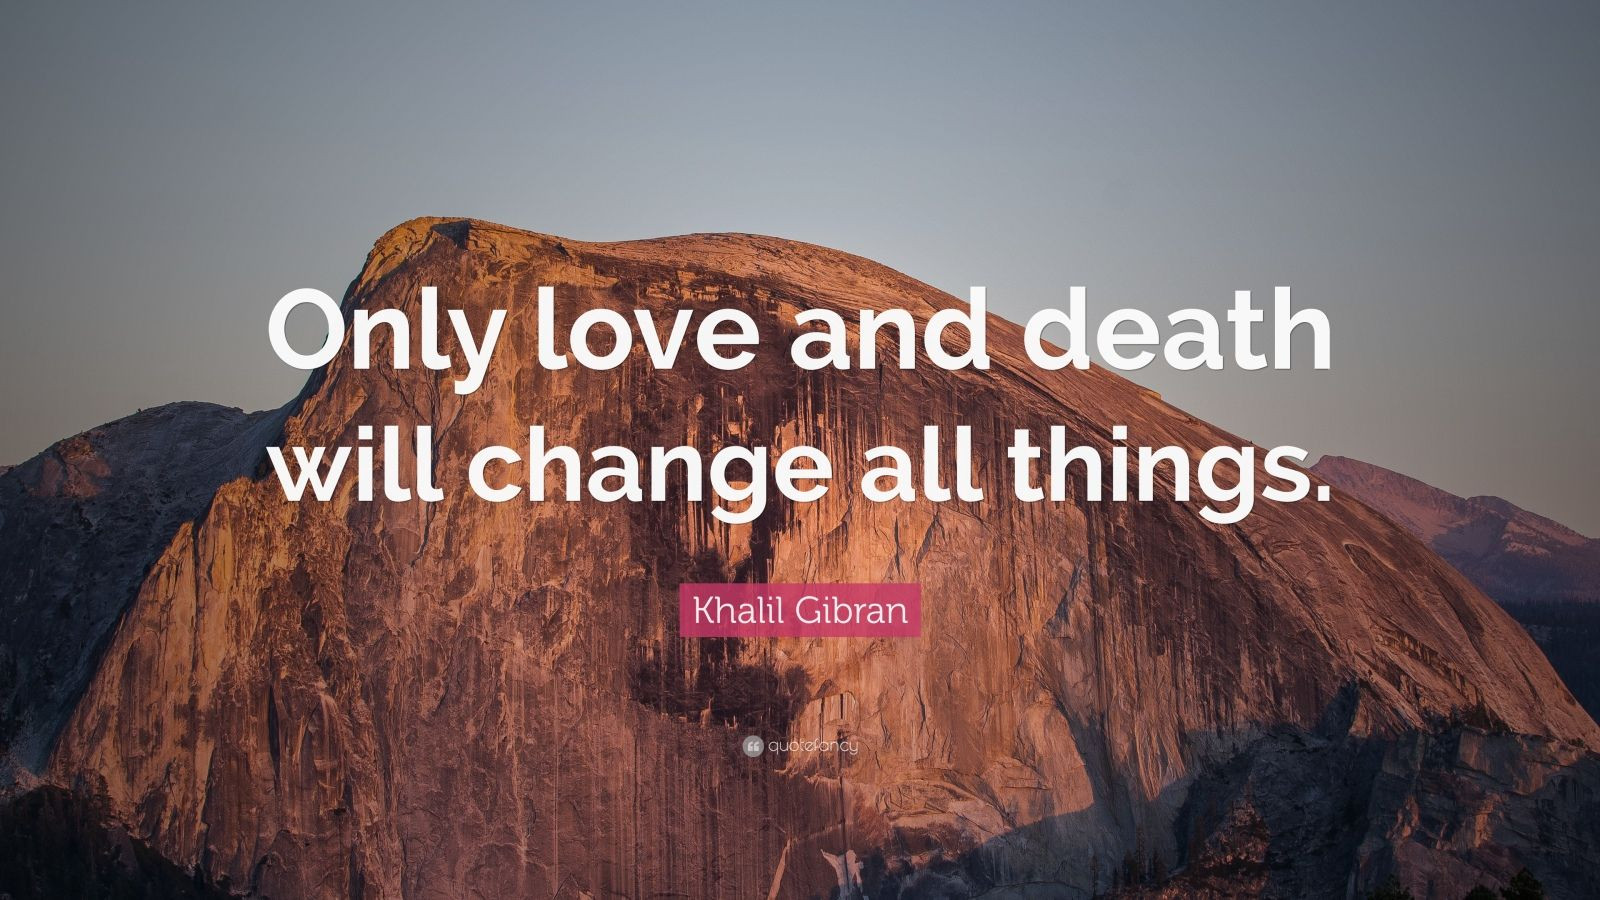 Quotes About Love And Death
 Khalil Gibran Quote “ ly love and will change all